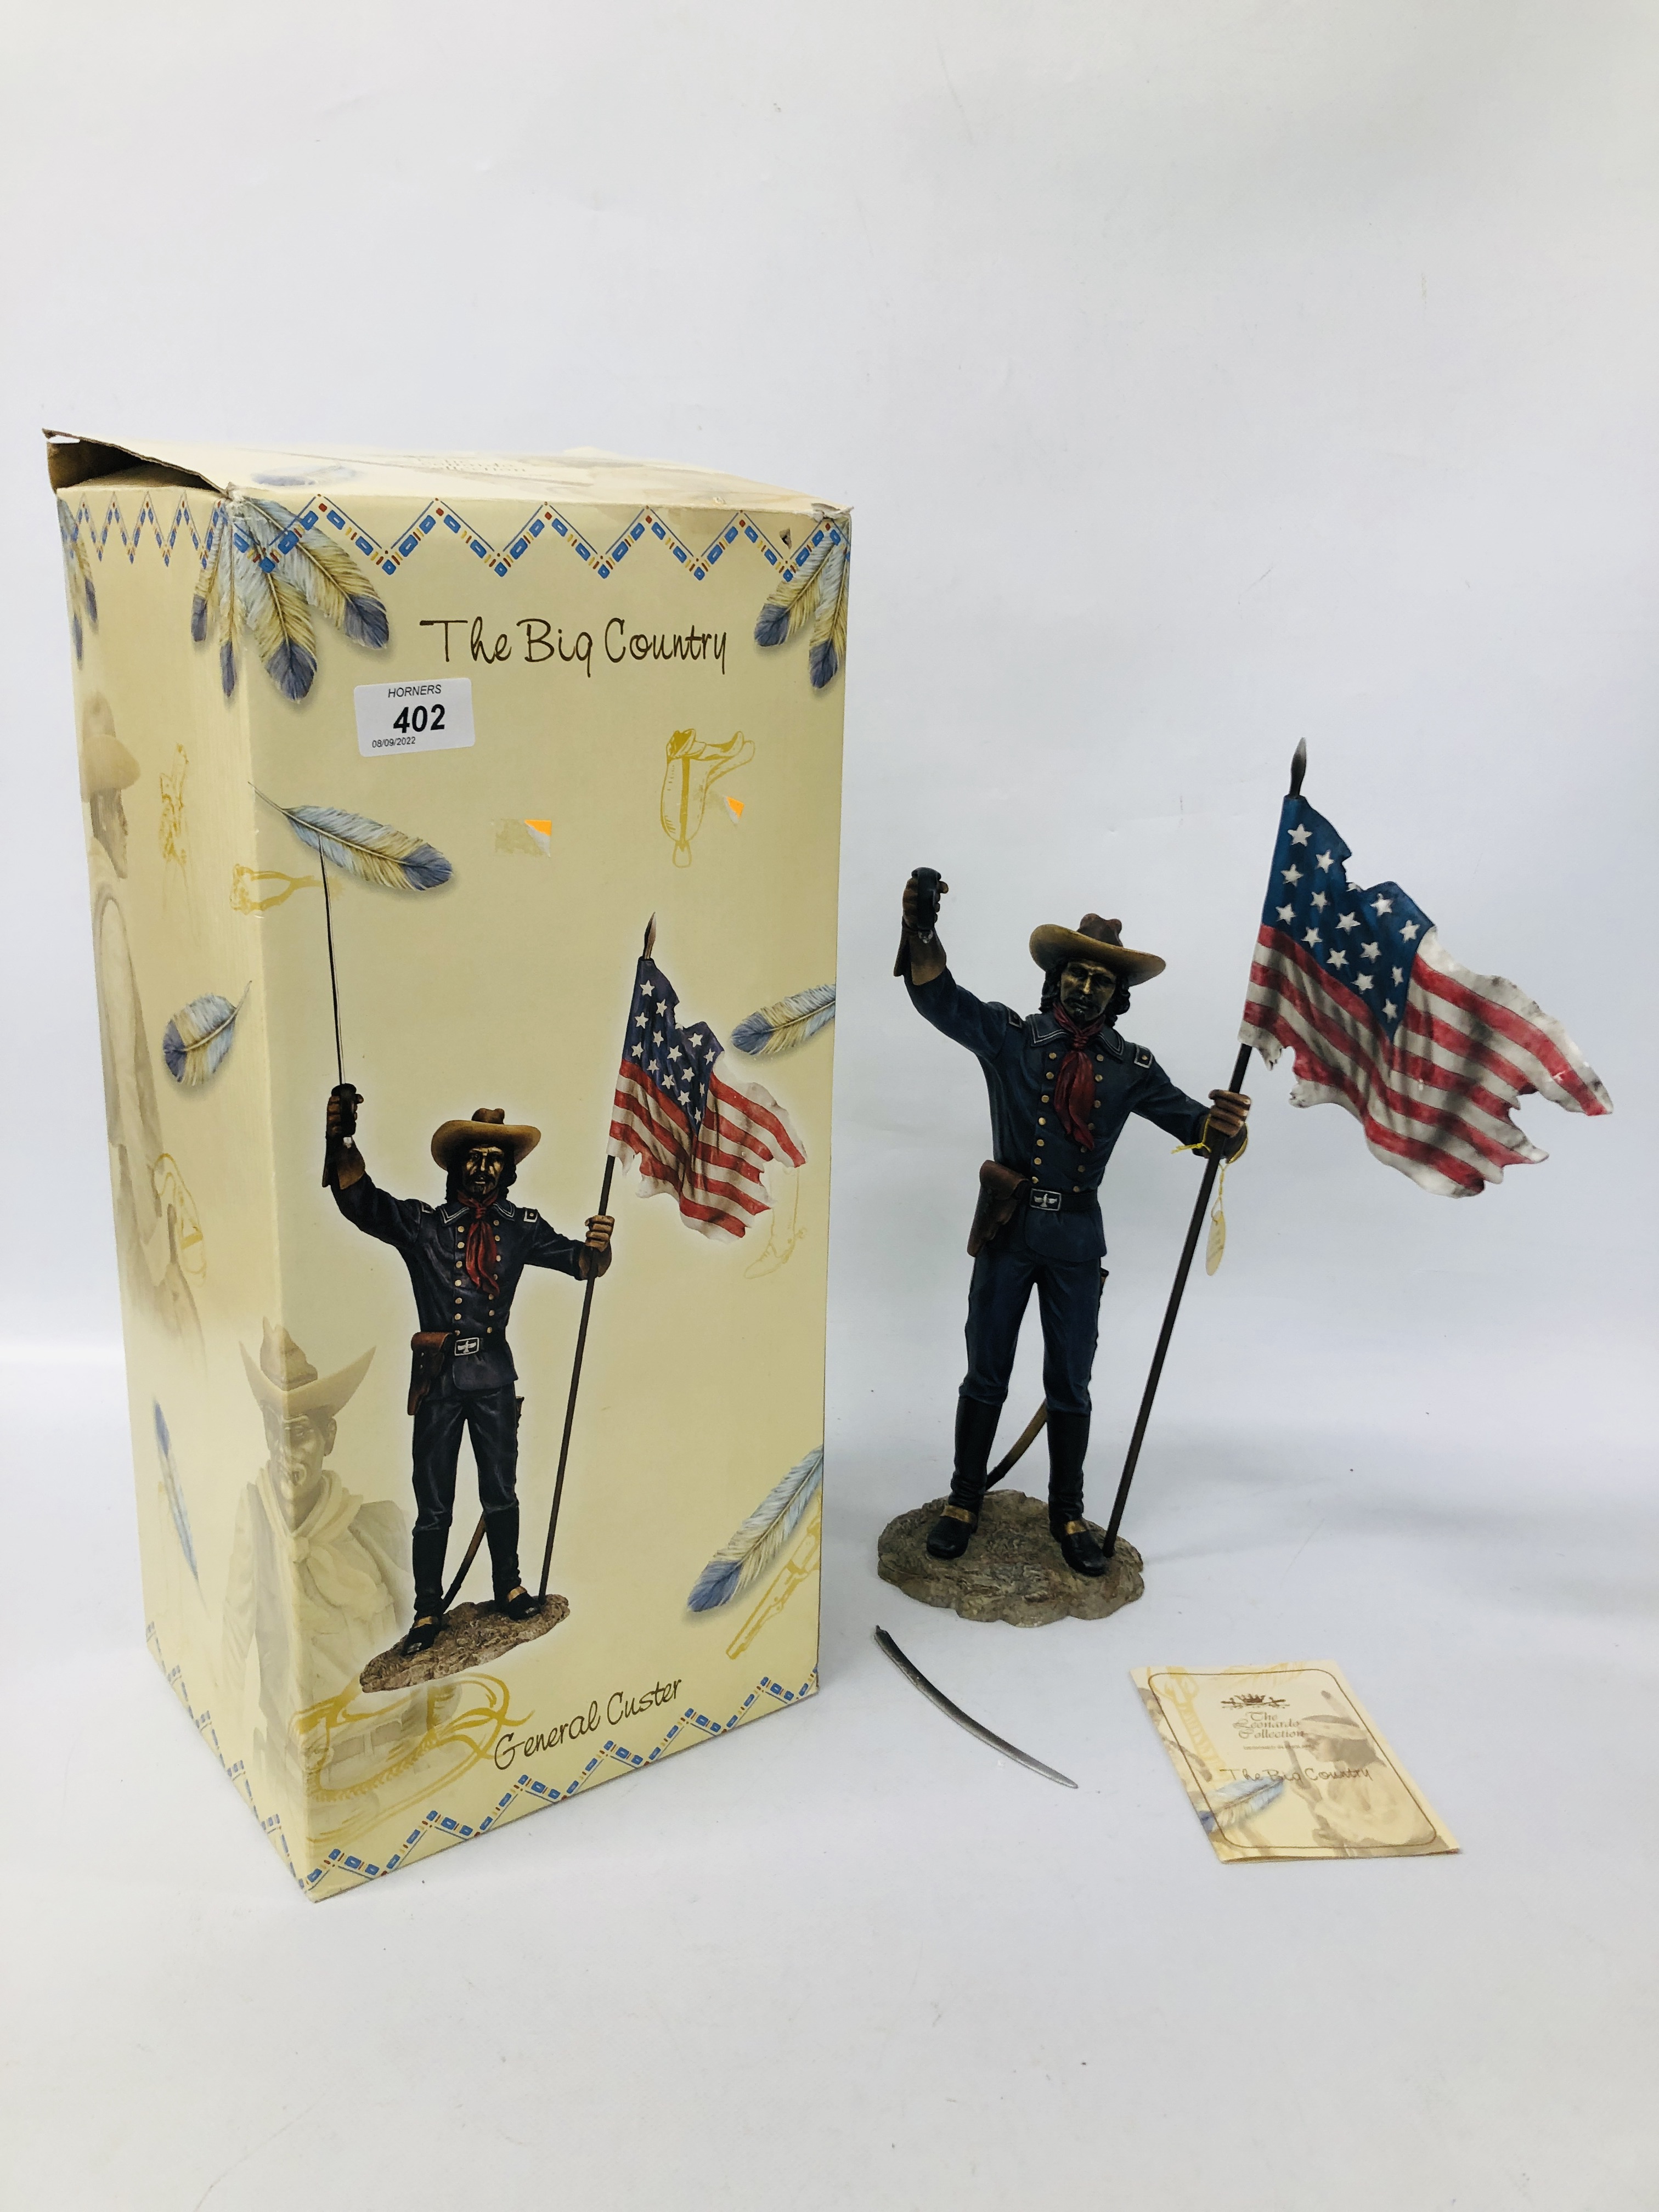 A BOXED THE LEONARDO COLLECTION THE BIG COUNTRY GENERAL CUSTER FIGURE. - Image 10 of 10